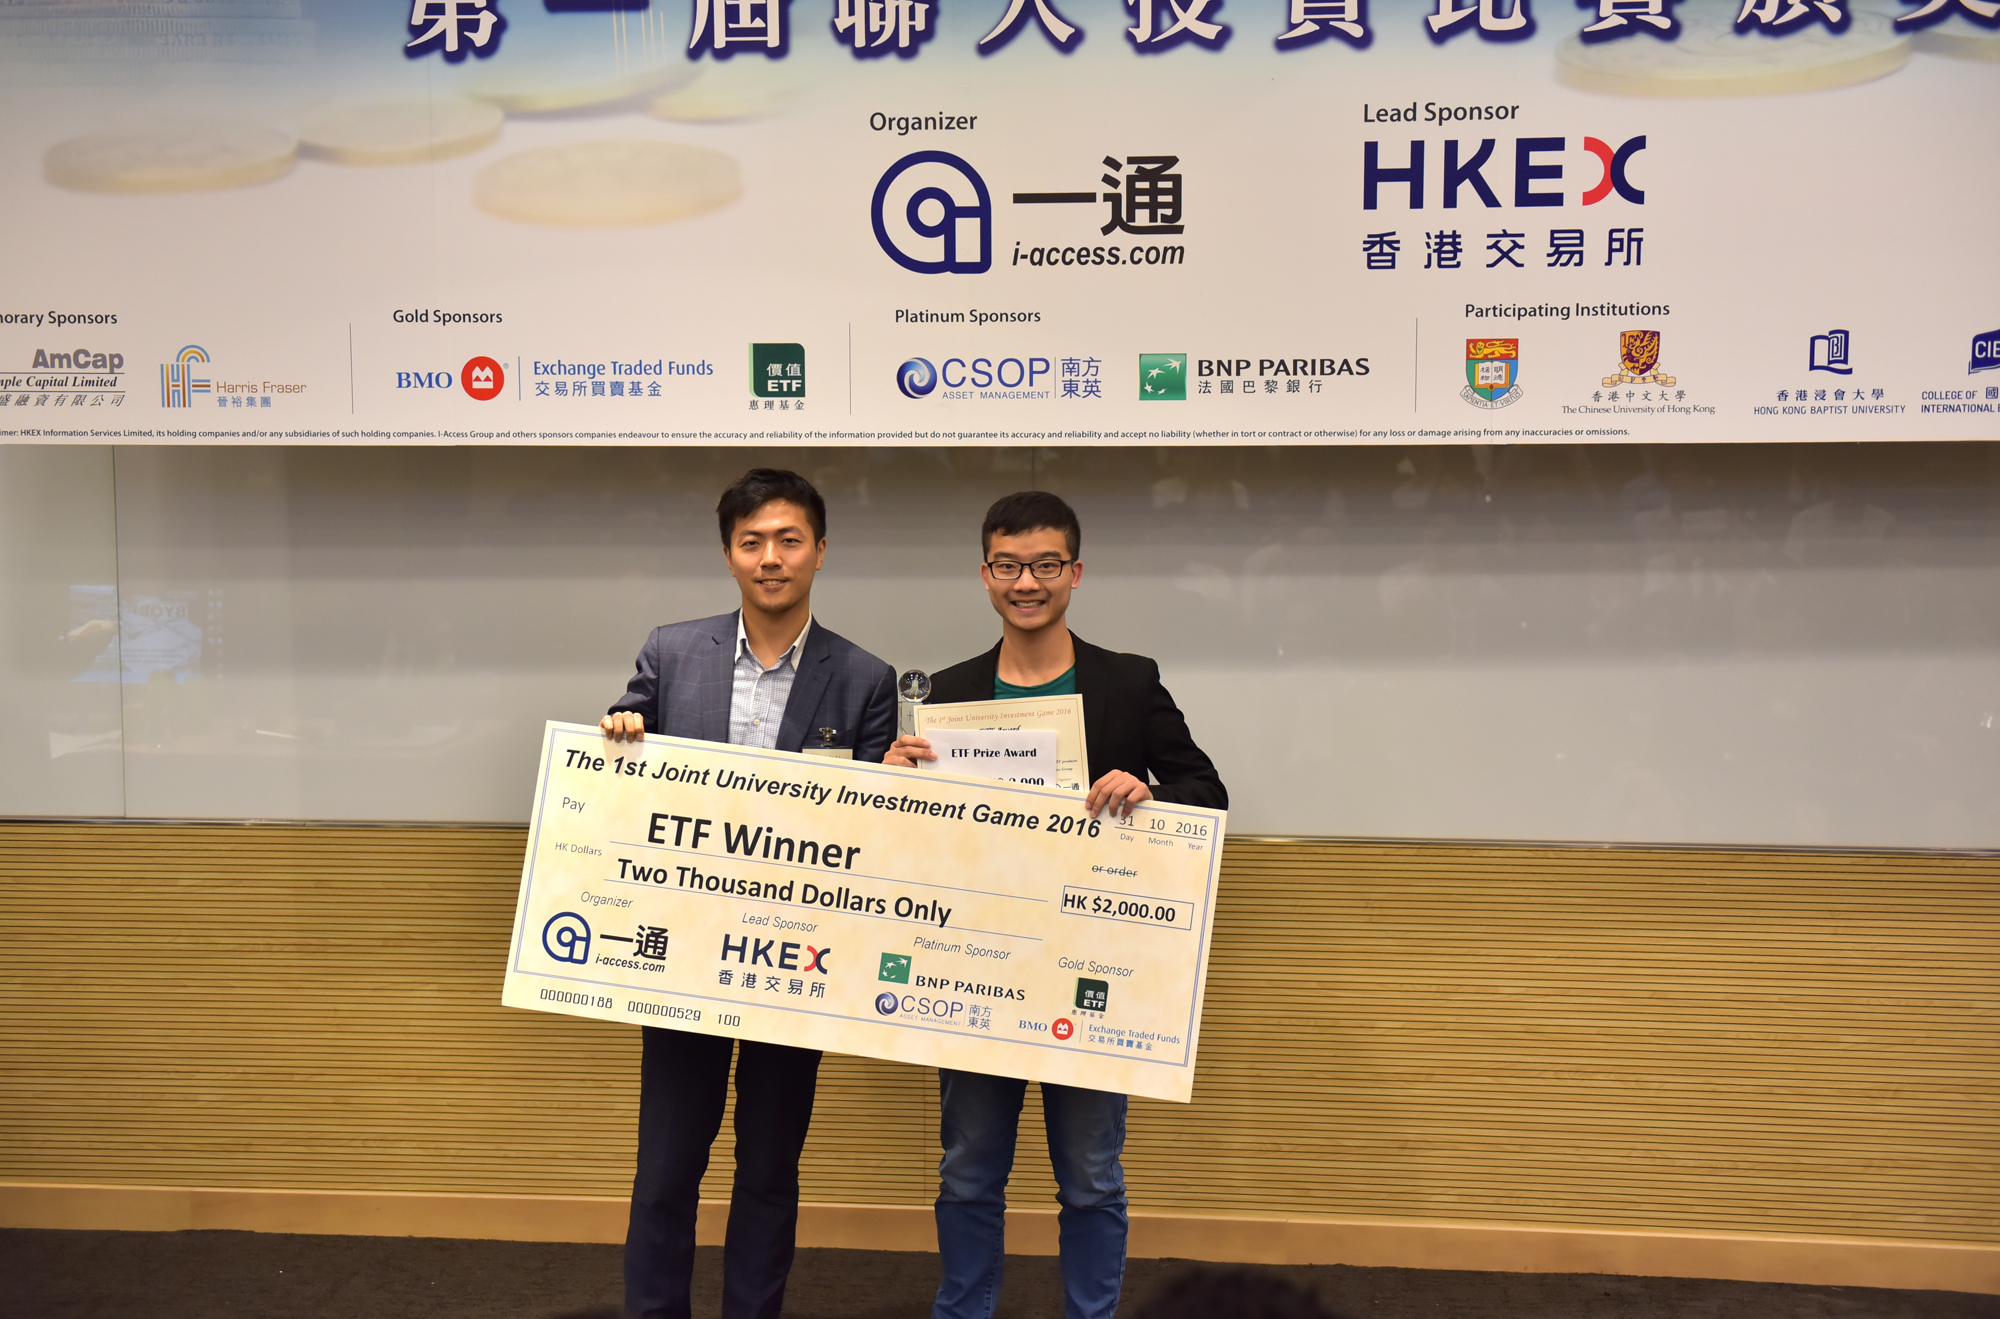 (Right) MA Siu Fung, Eric, Financial Management wins the ETF Award in the 1st Joint University Investment Game 2016